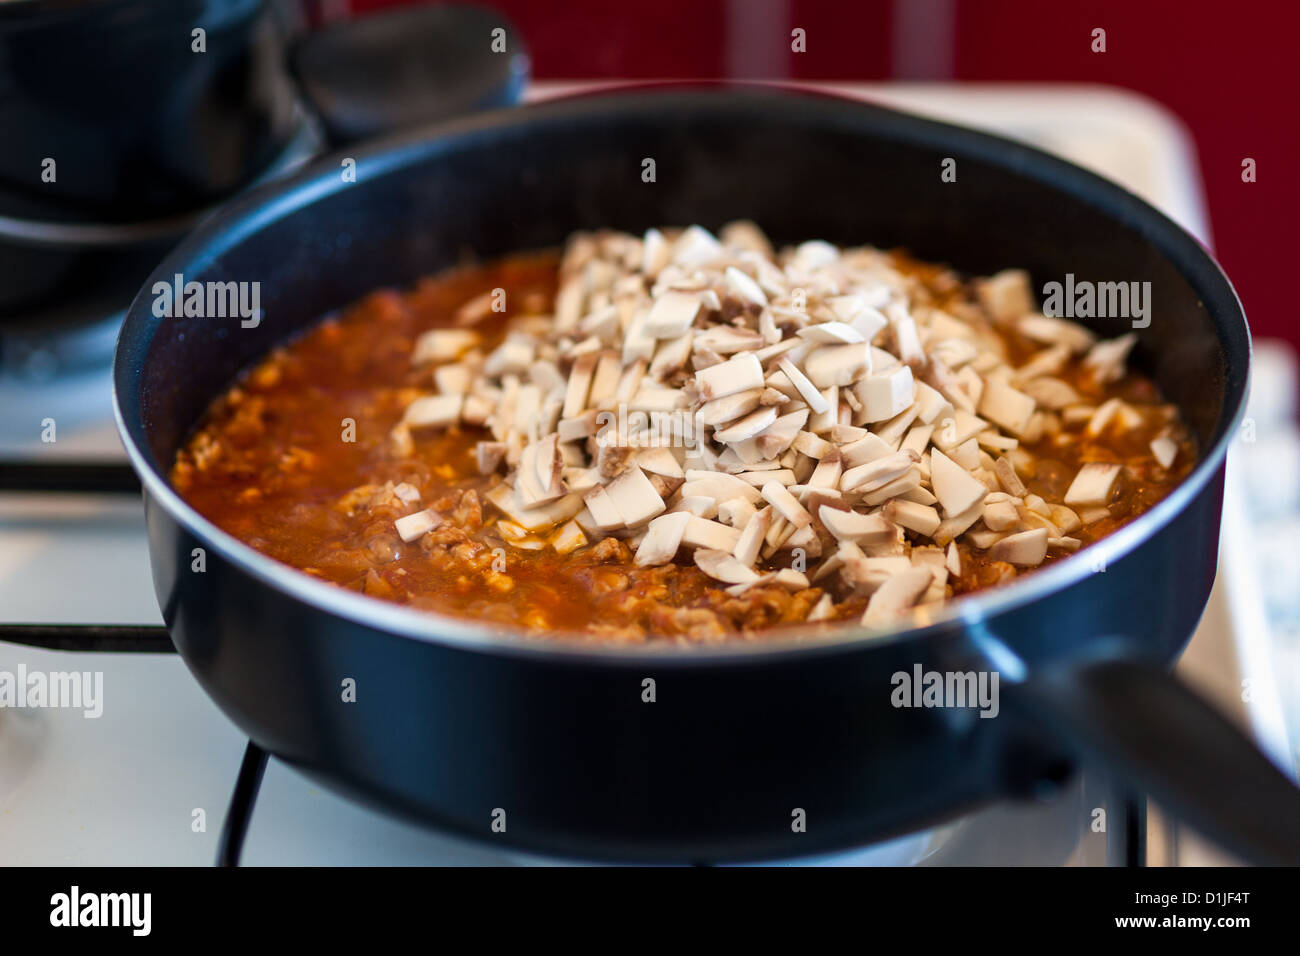 Closeup of stew cooking in pan on a stove Stock Photo - Alamy